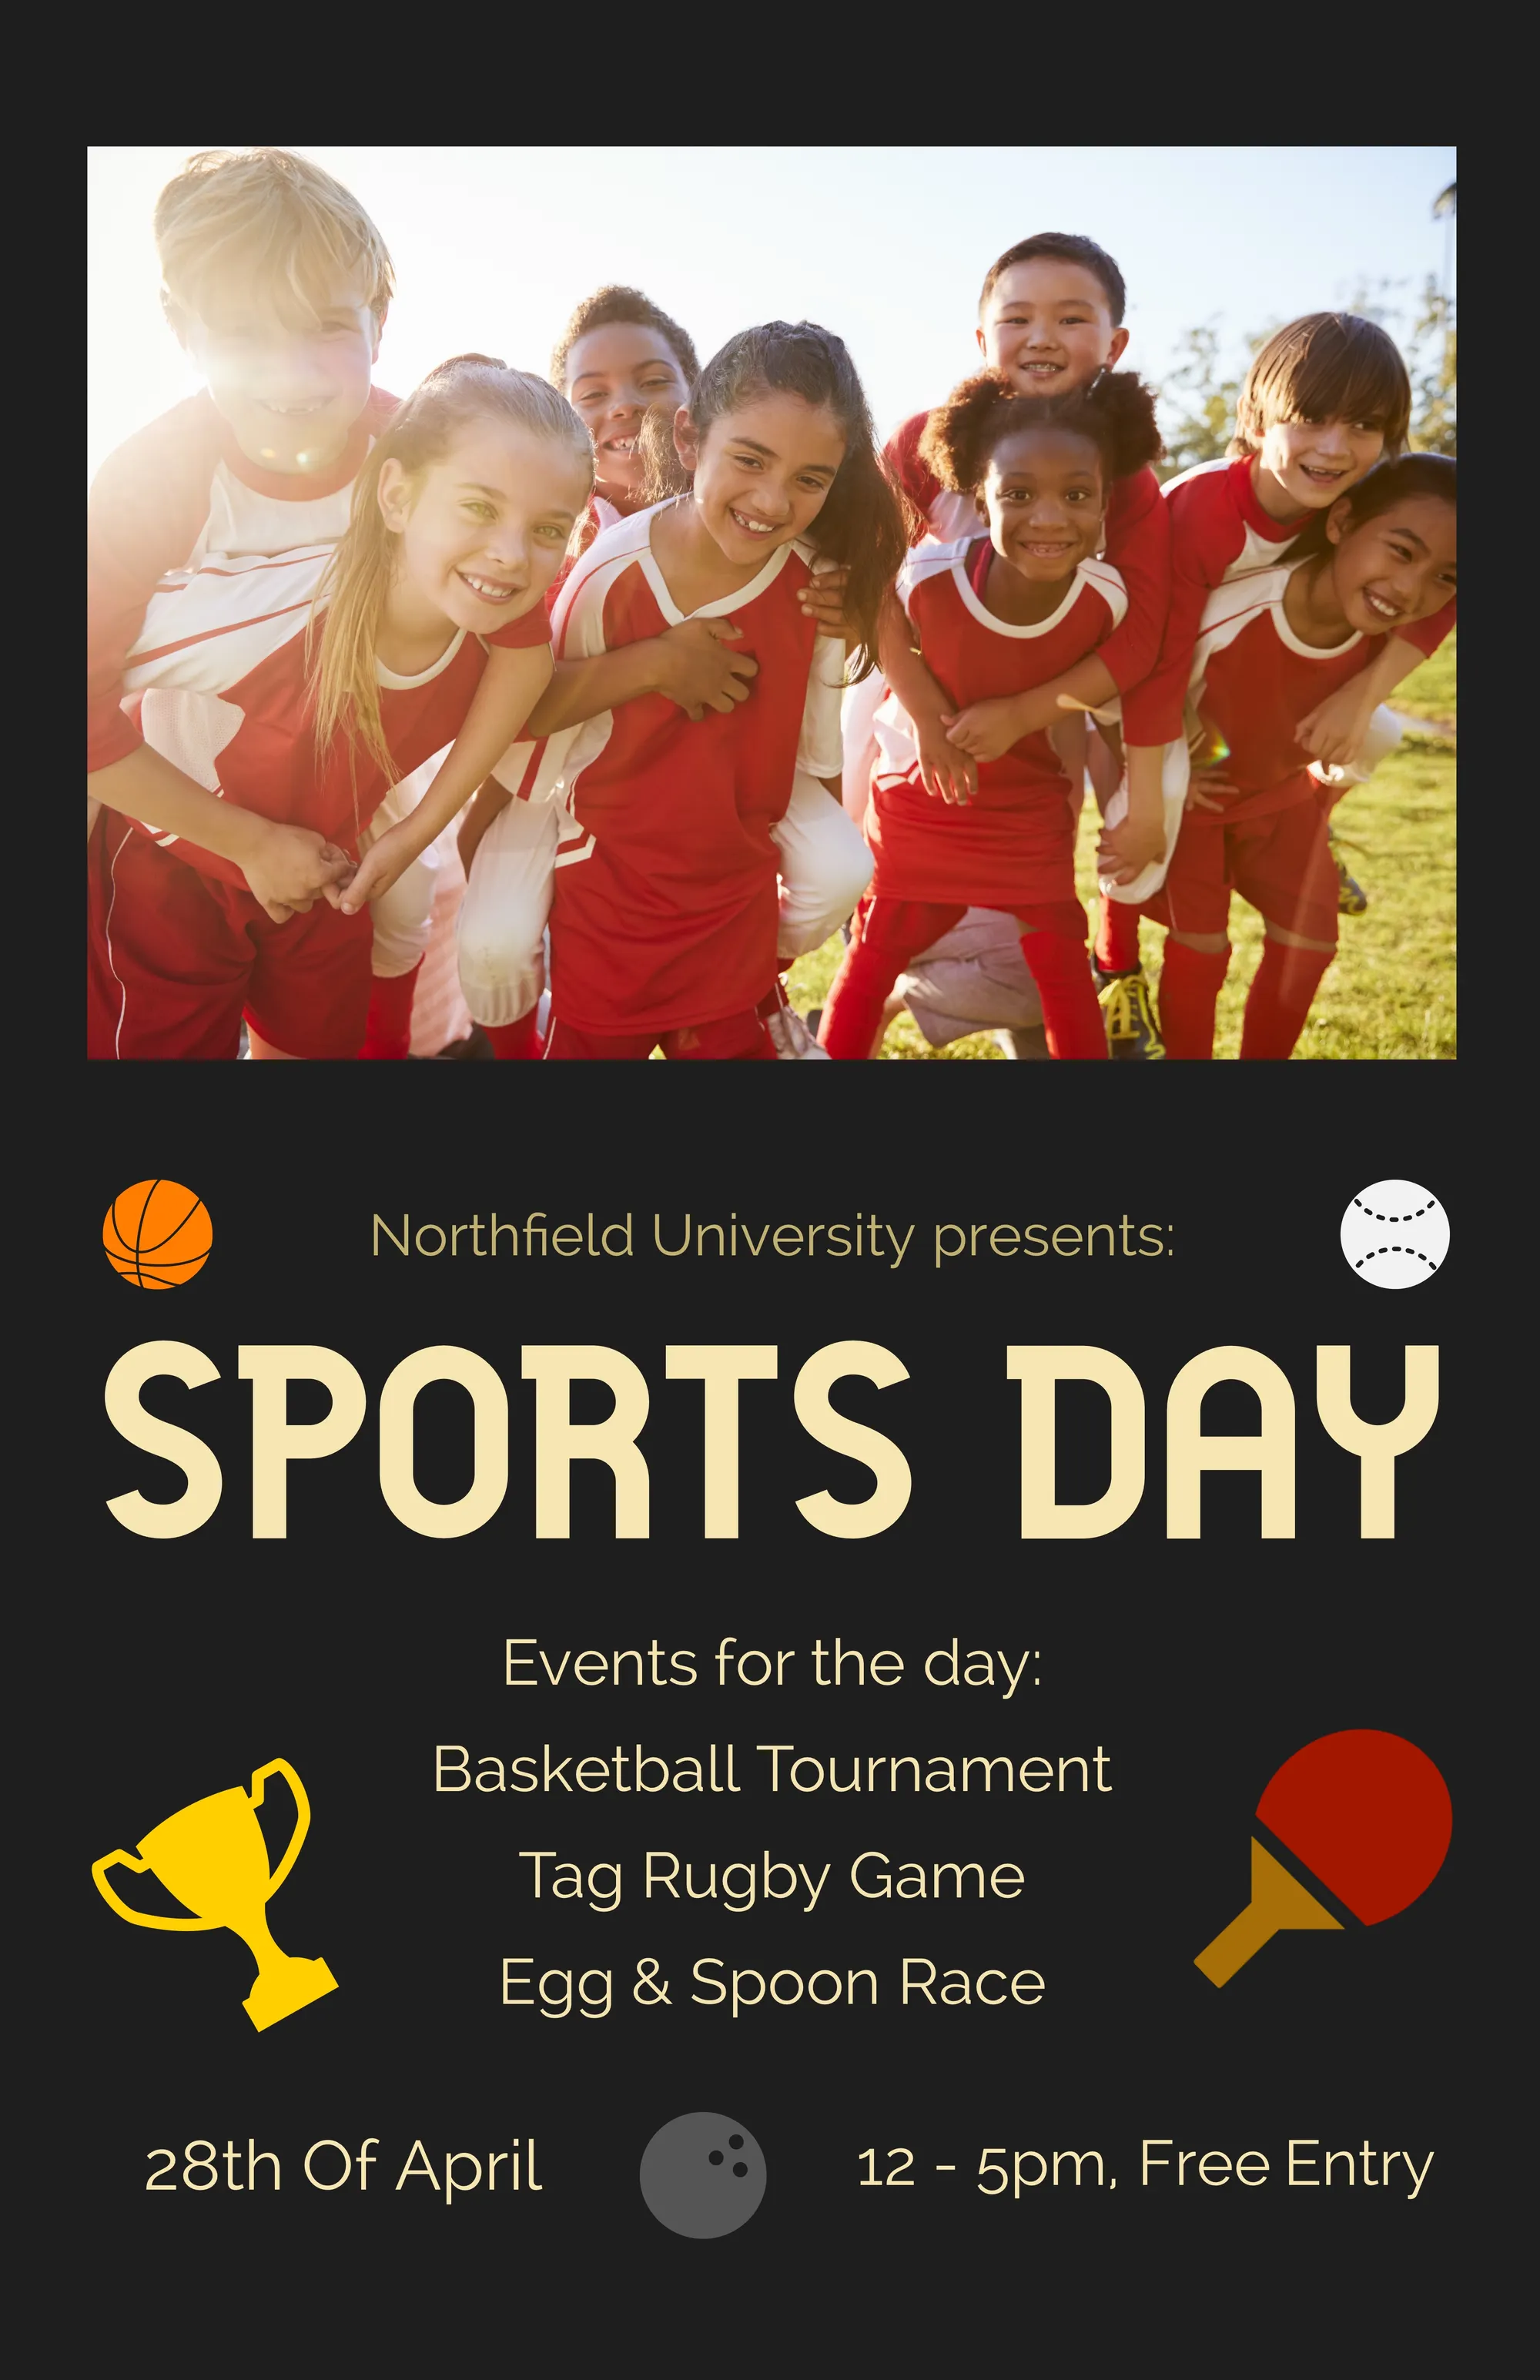 Black and Yellow University Sports Day Event Poster with Children